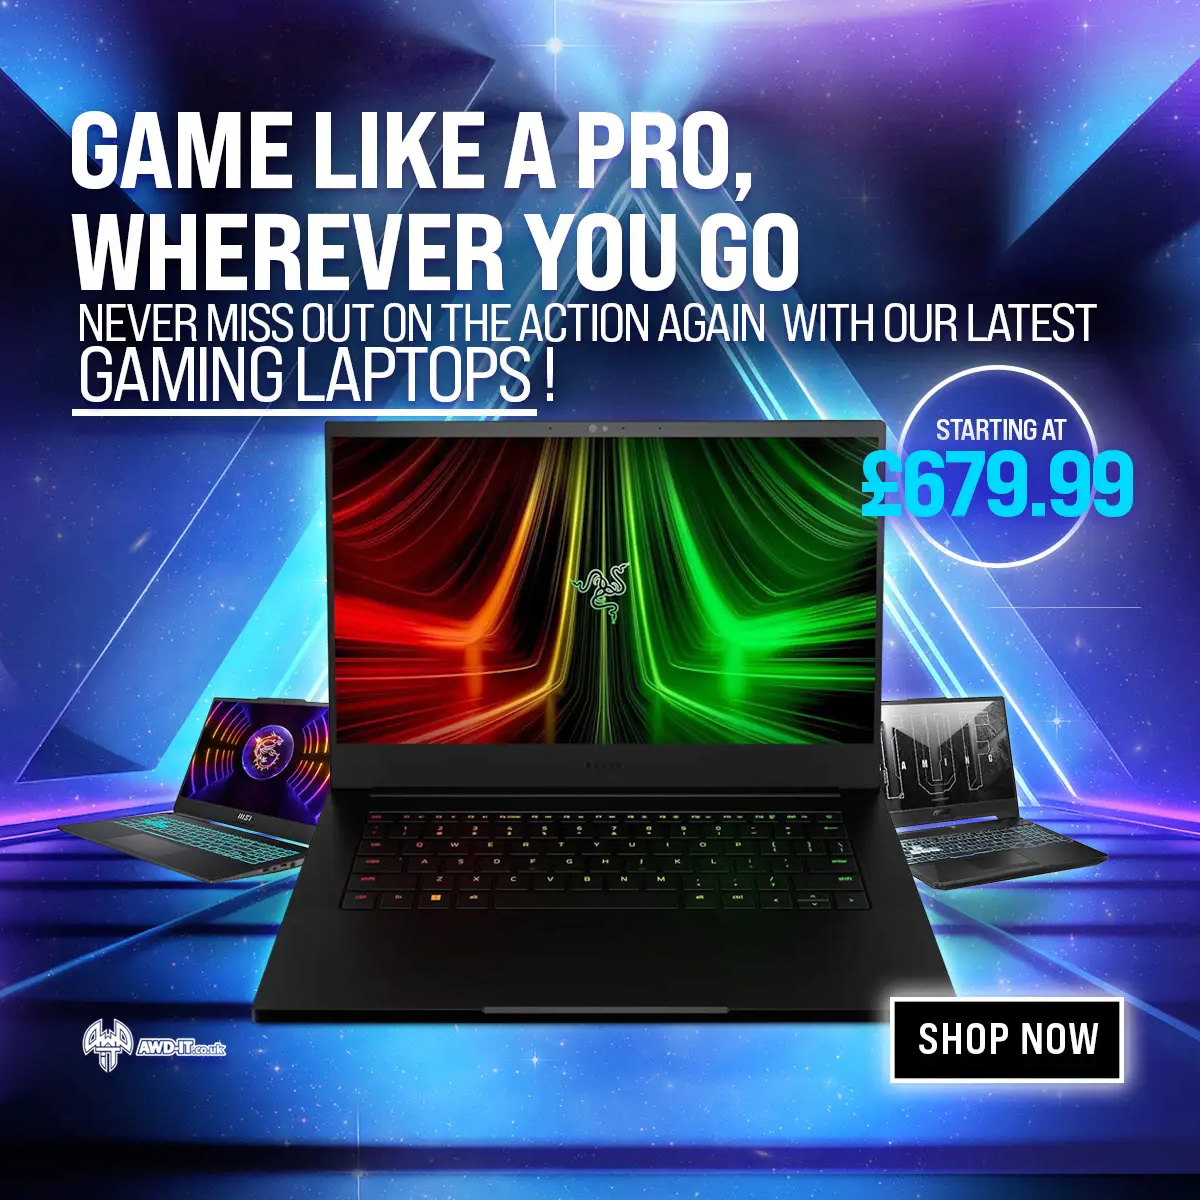 Game on the go with these monster gaming laptops! ✨ Insane specs up for grabs: ⚡ Up to NVIDIA GeFORCE RTX 4090 ⚡ Up to Ryzen 9 ⚡ Up to Intel i9 ⚡ SHOP NOW > tinyurl.com/mp3rsb5c #gaminglaptop #gamingrig #gaminggear #battlestations #gamingsetup #pcgaming #gaming